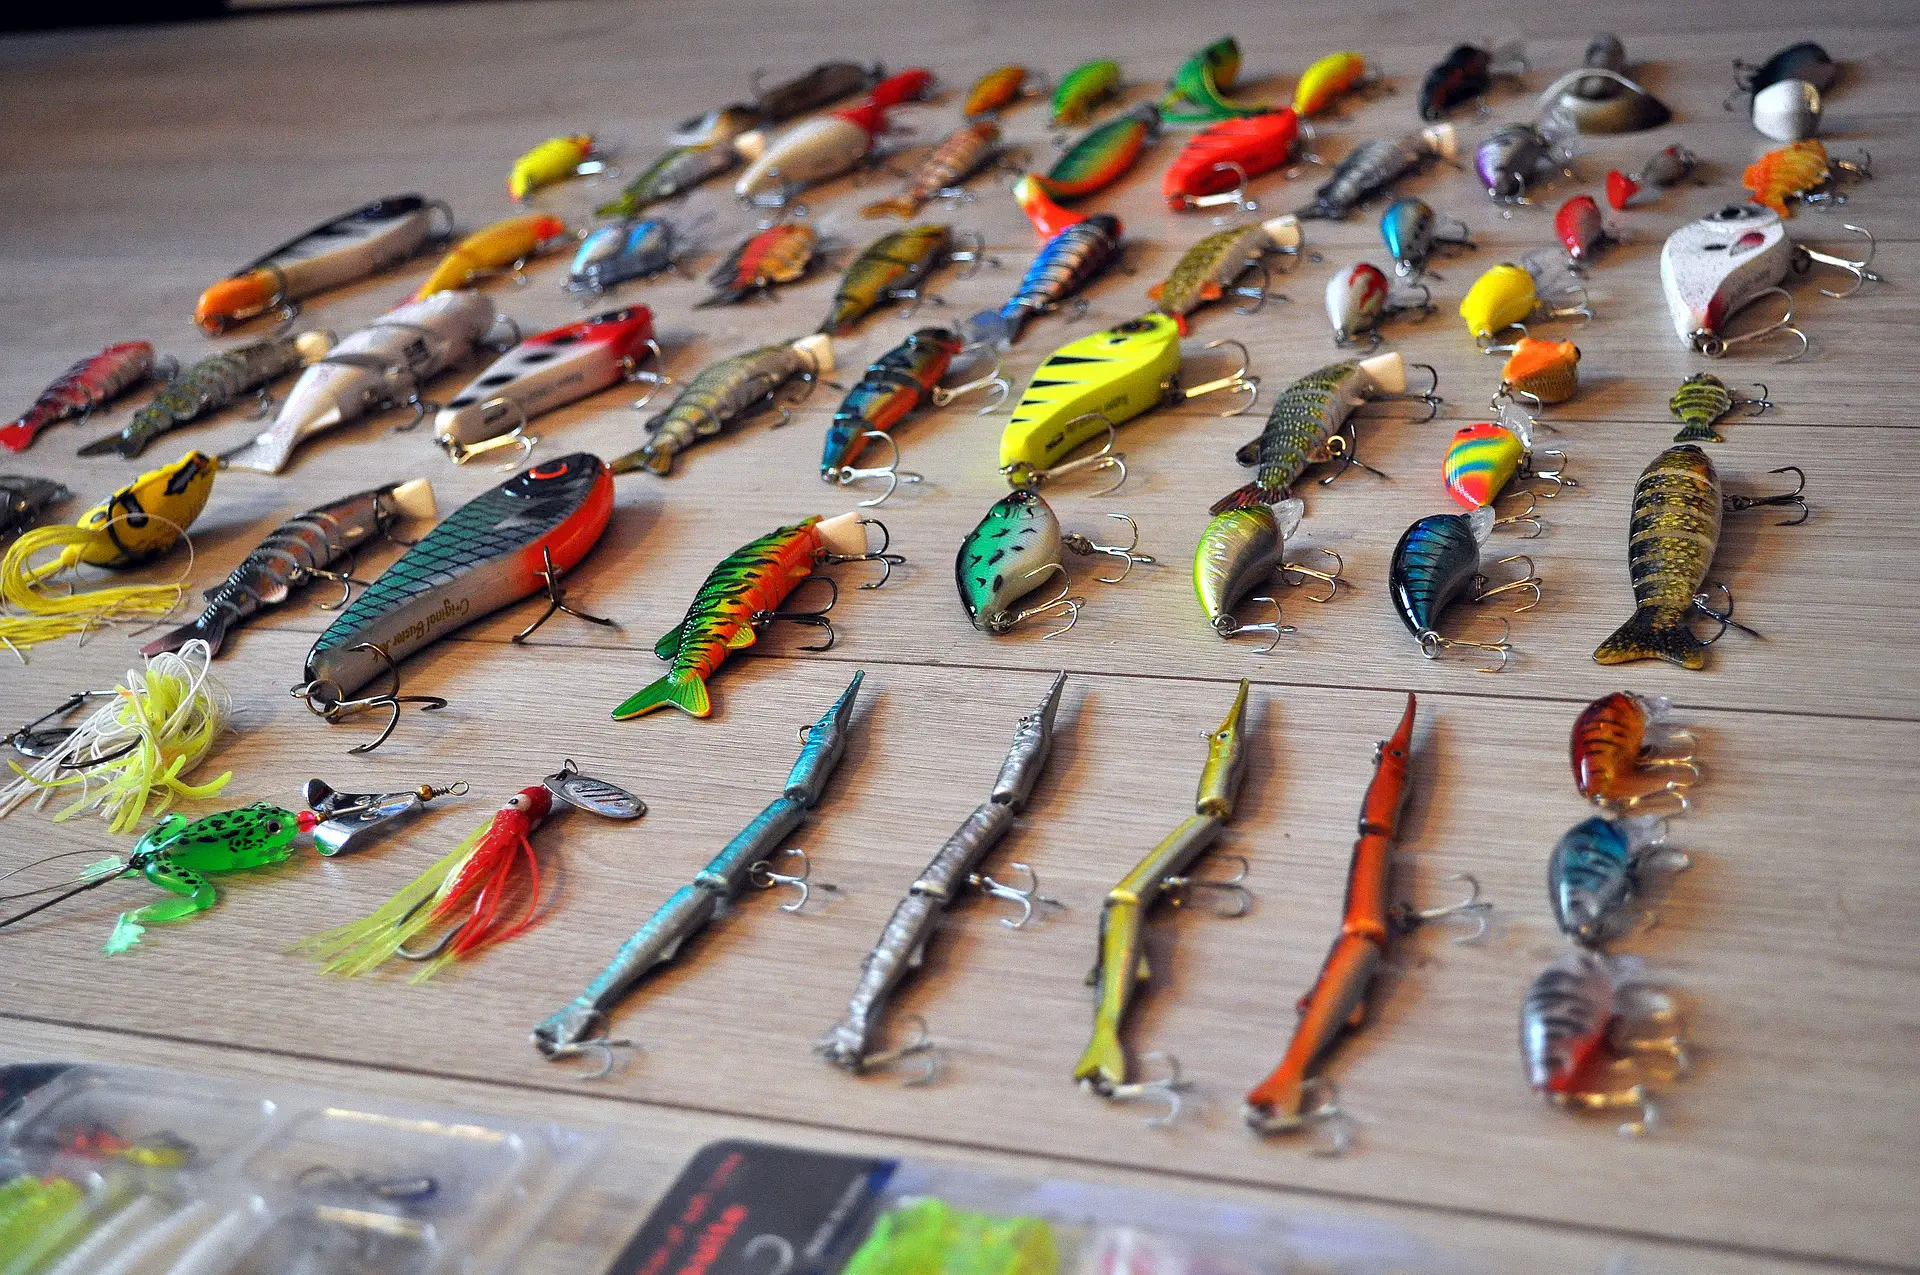 Fishing lures laid out like at a tackle shop